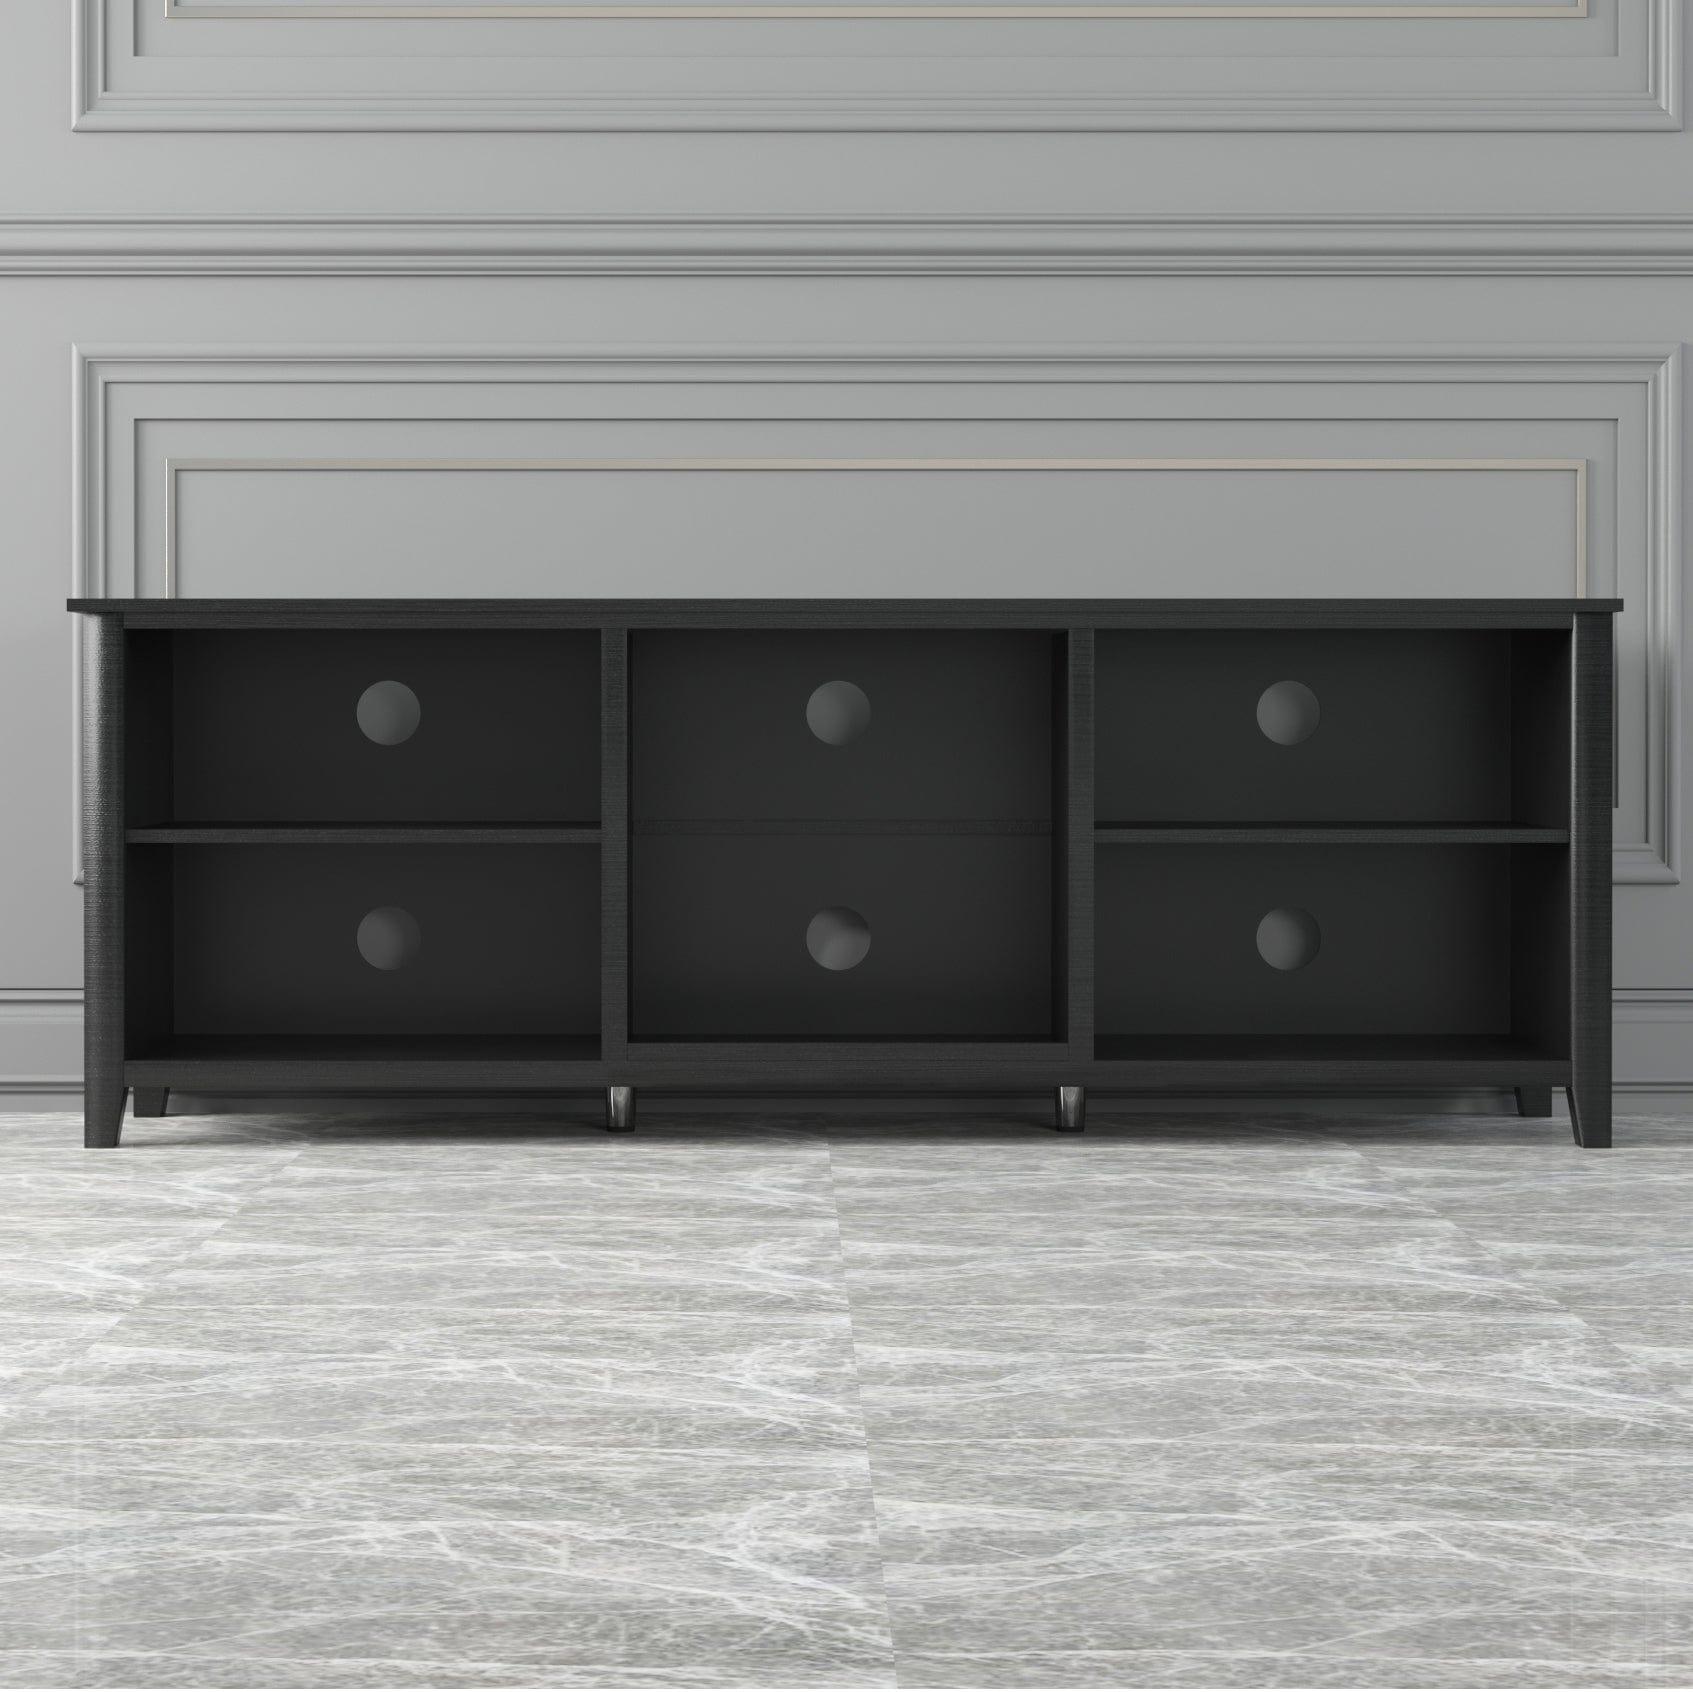 Shop TV Stand Storage Media Console Entertainment Center,Tradition Black,wihout drawer Mademoiselle Home Decor